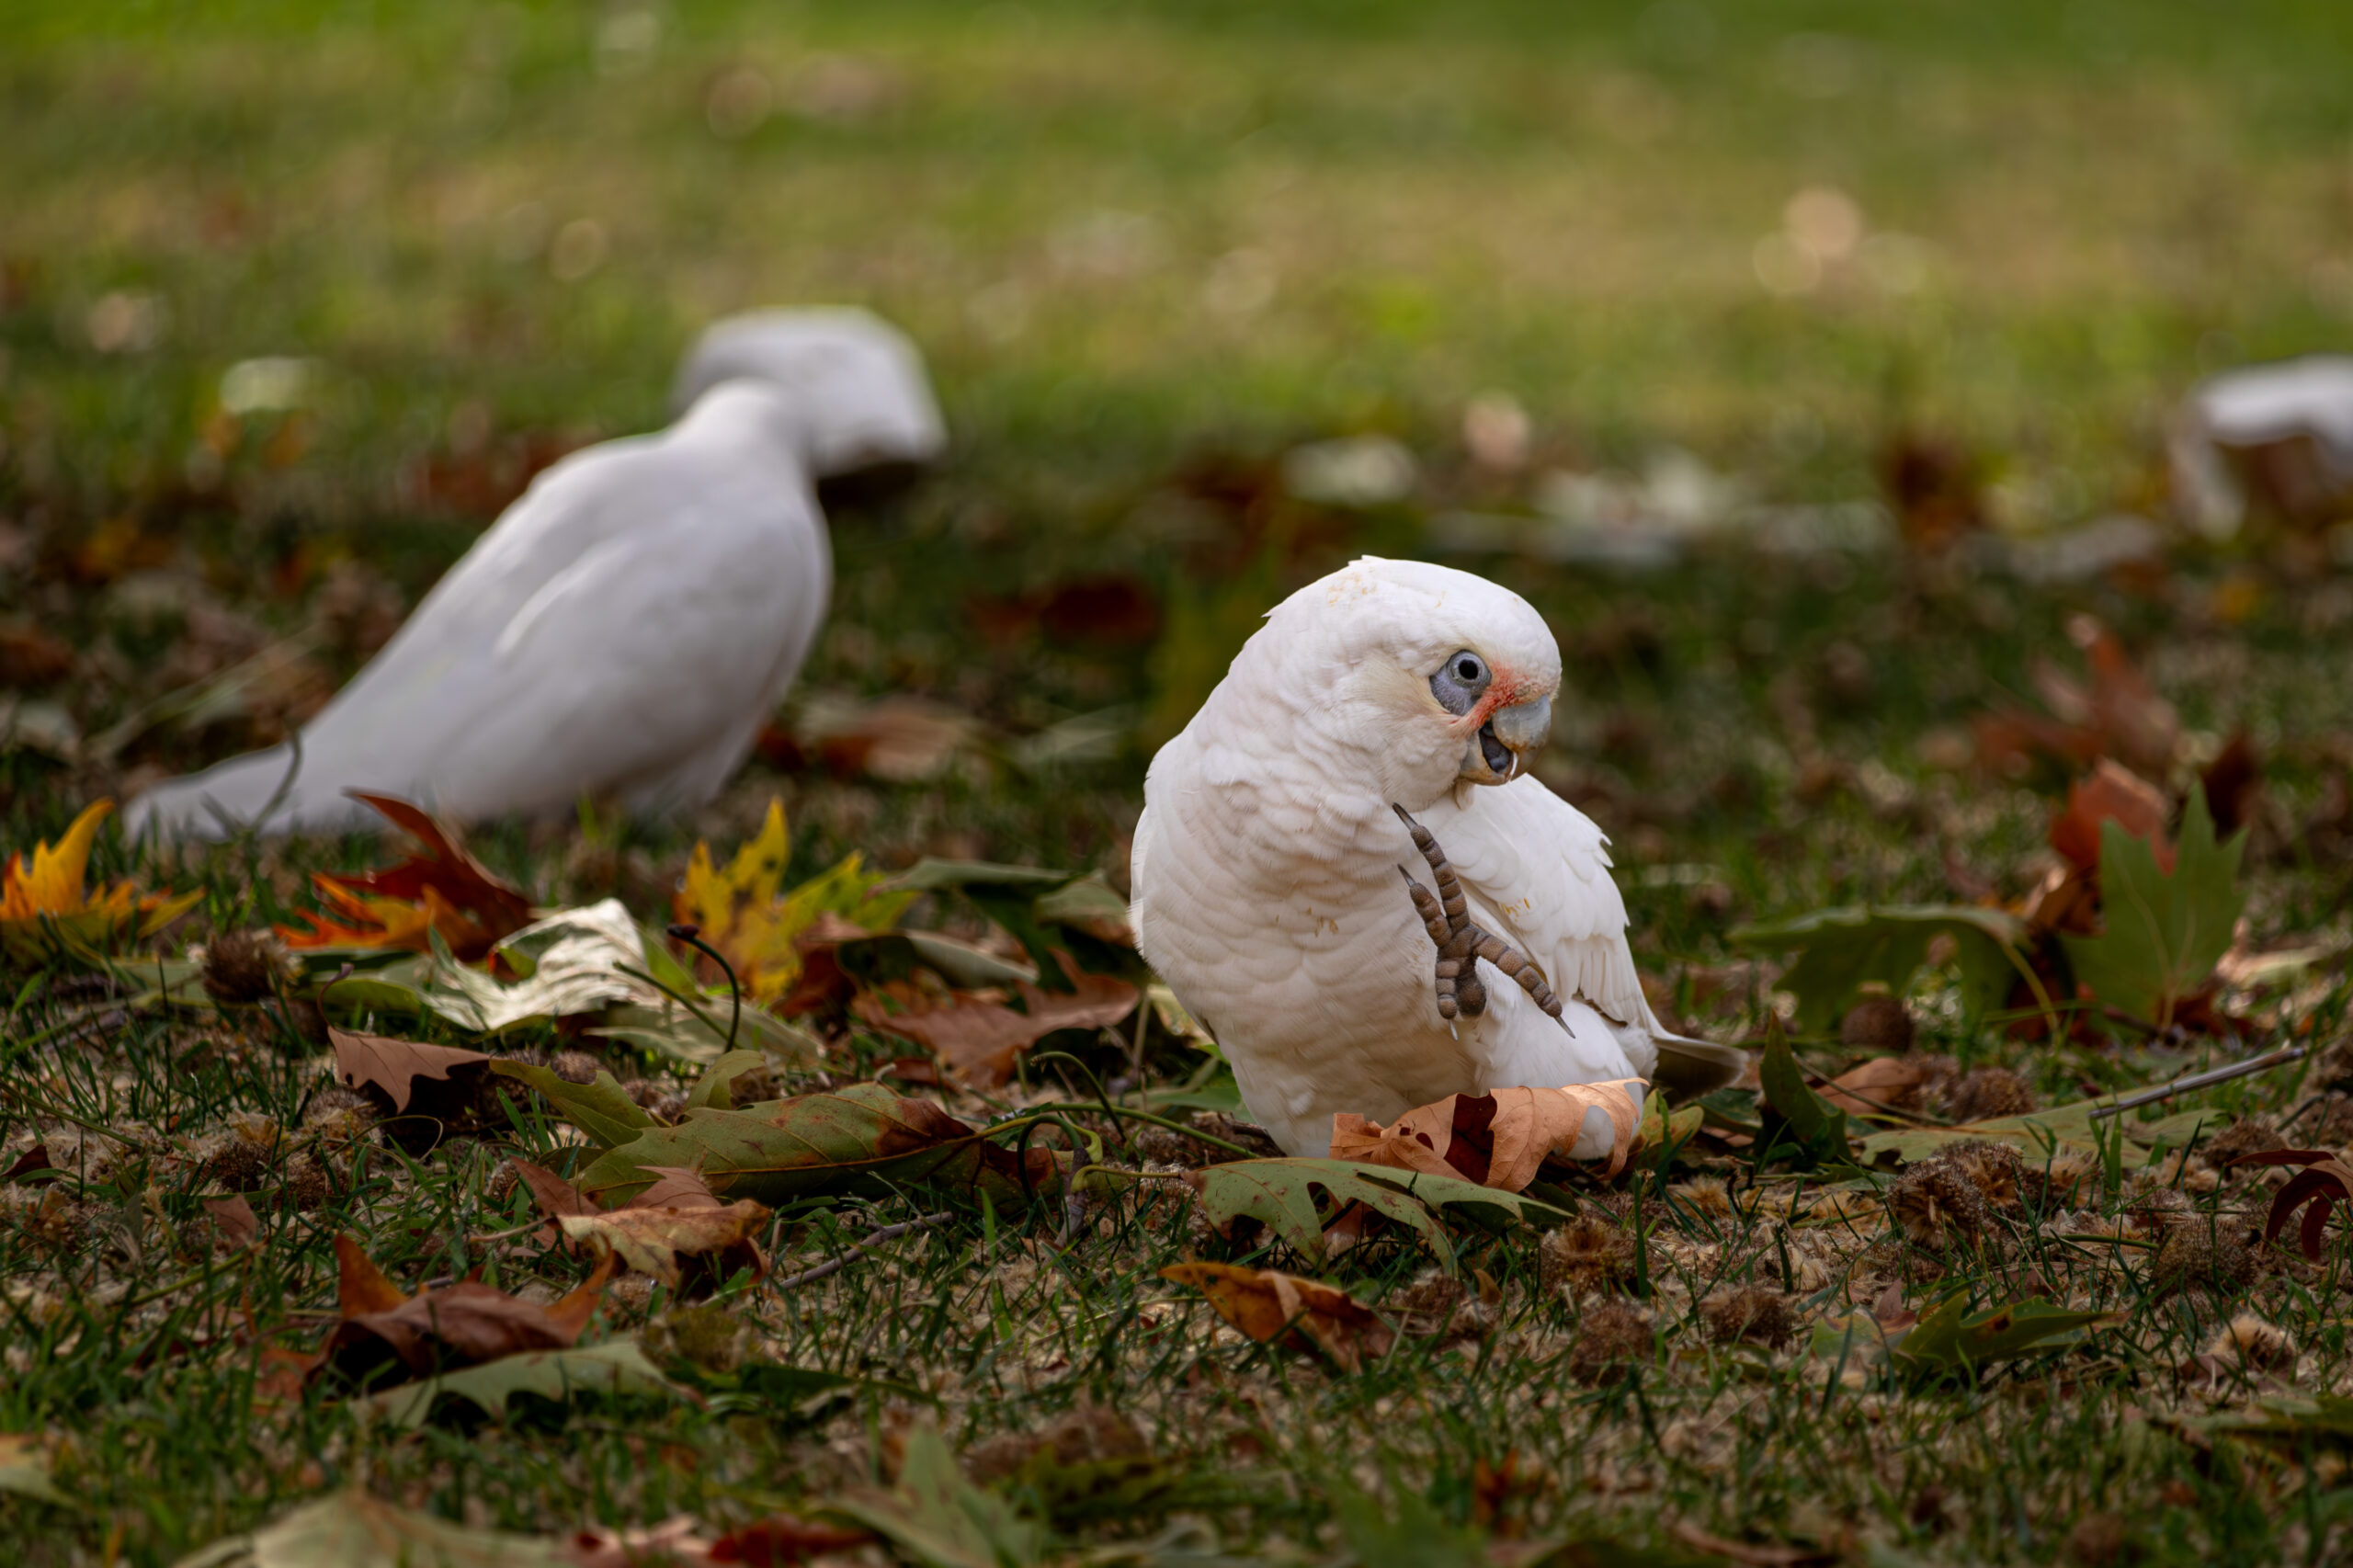 A white bird with pink features sitting on the ground with one foot raised